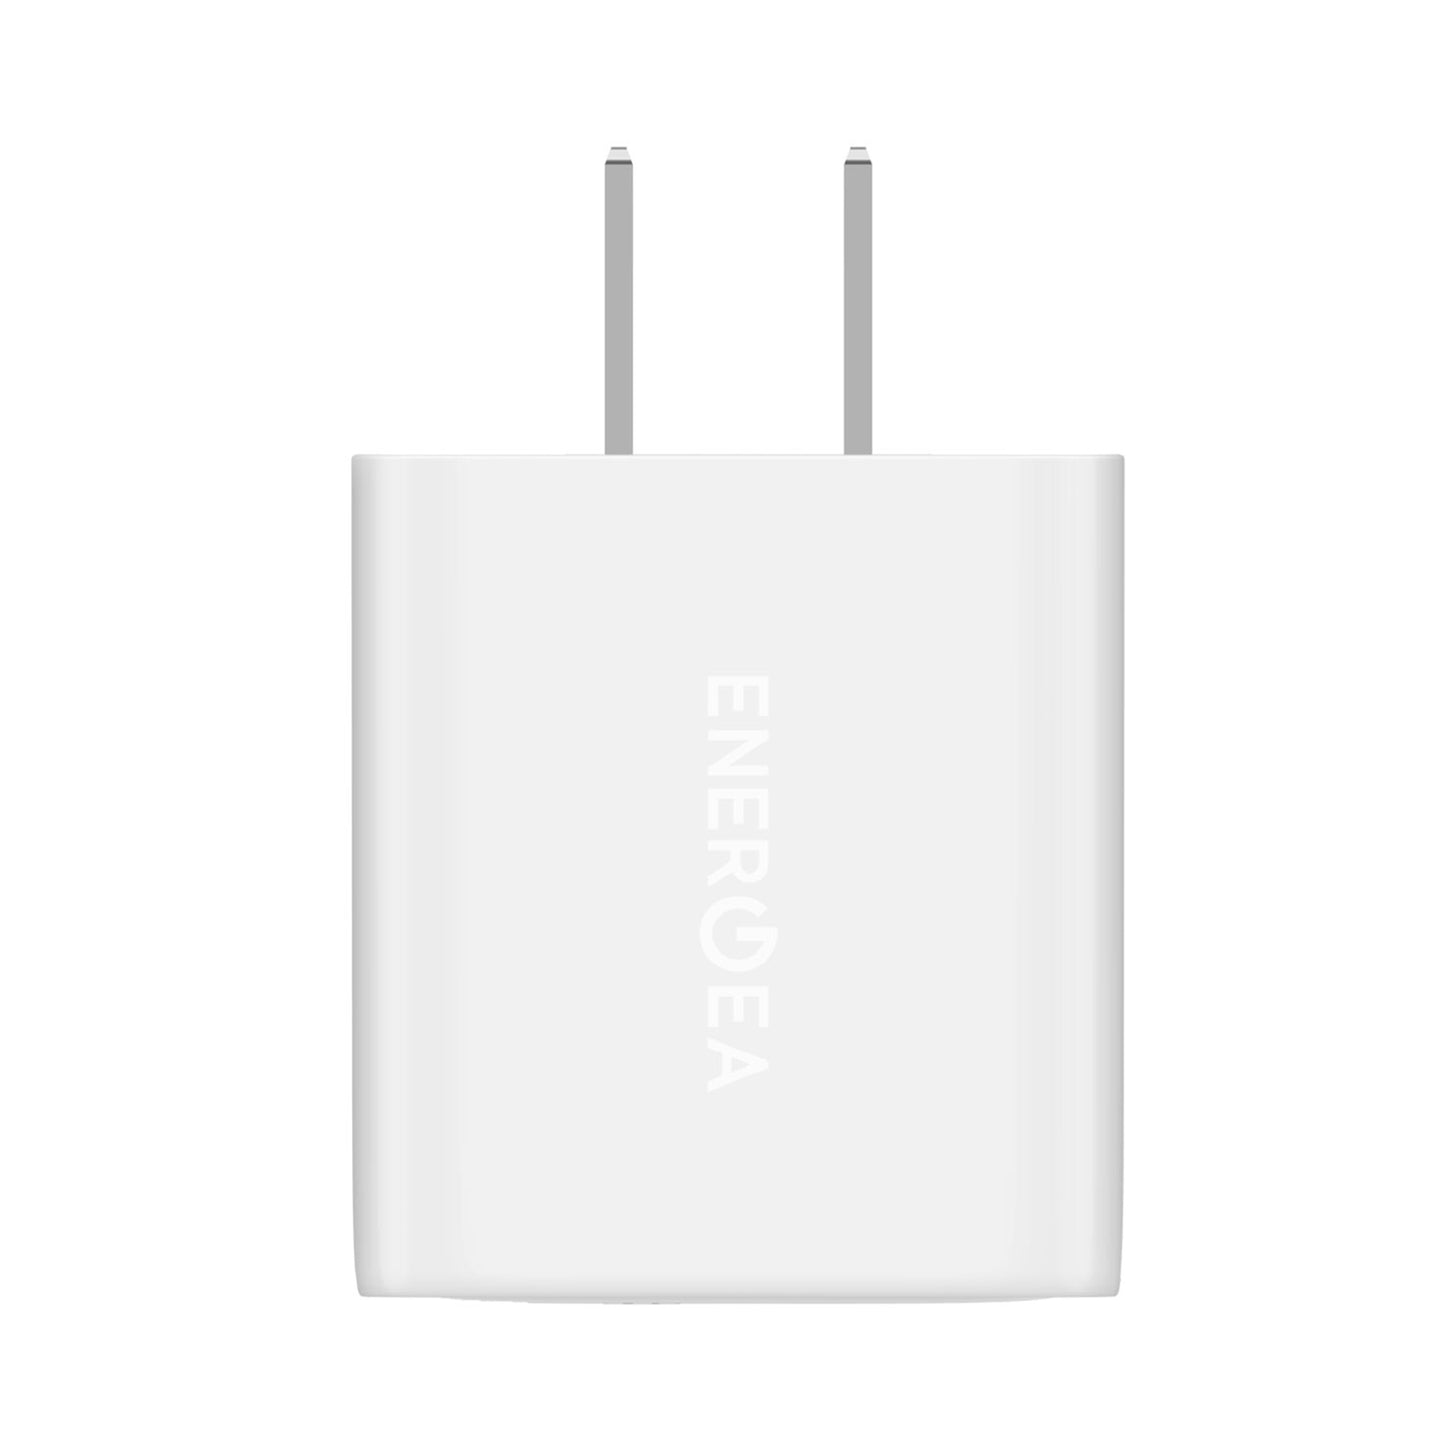 ENERGEA AmpCharge PS33 Pro Wall Charger - White